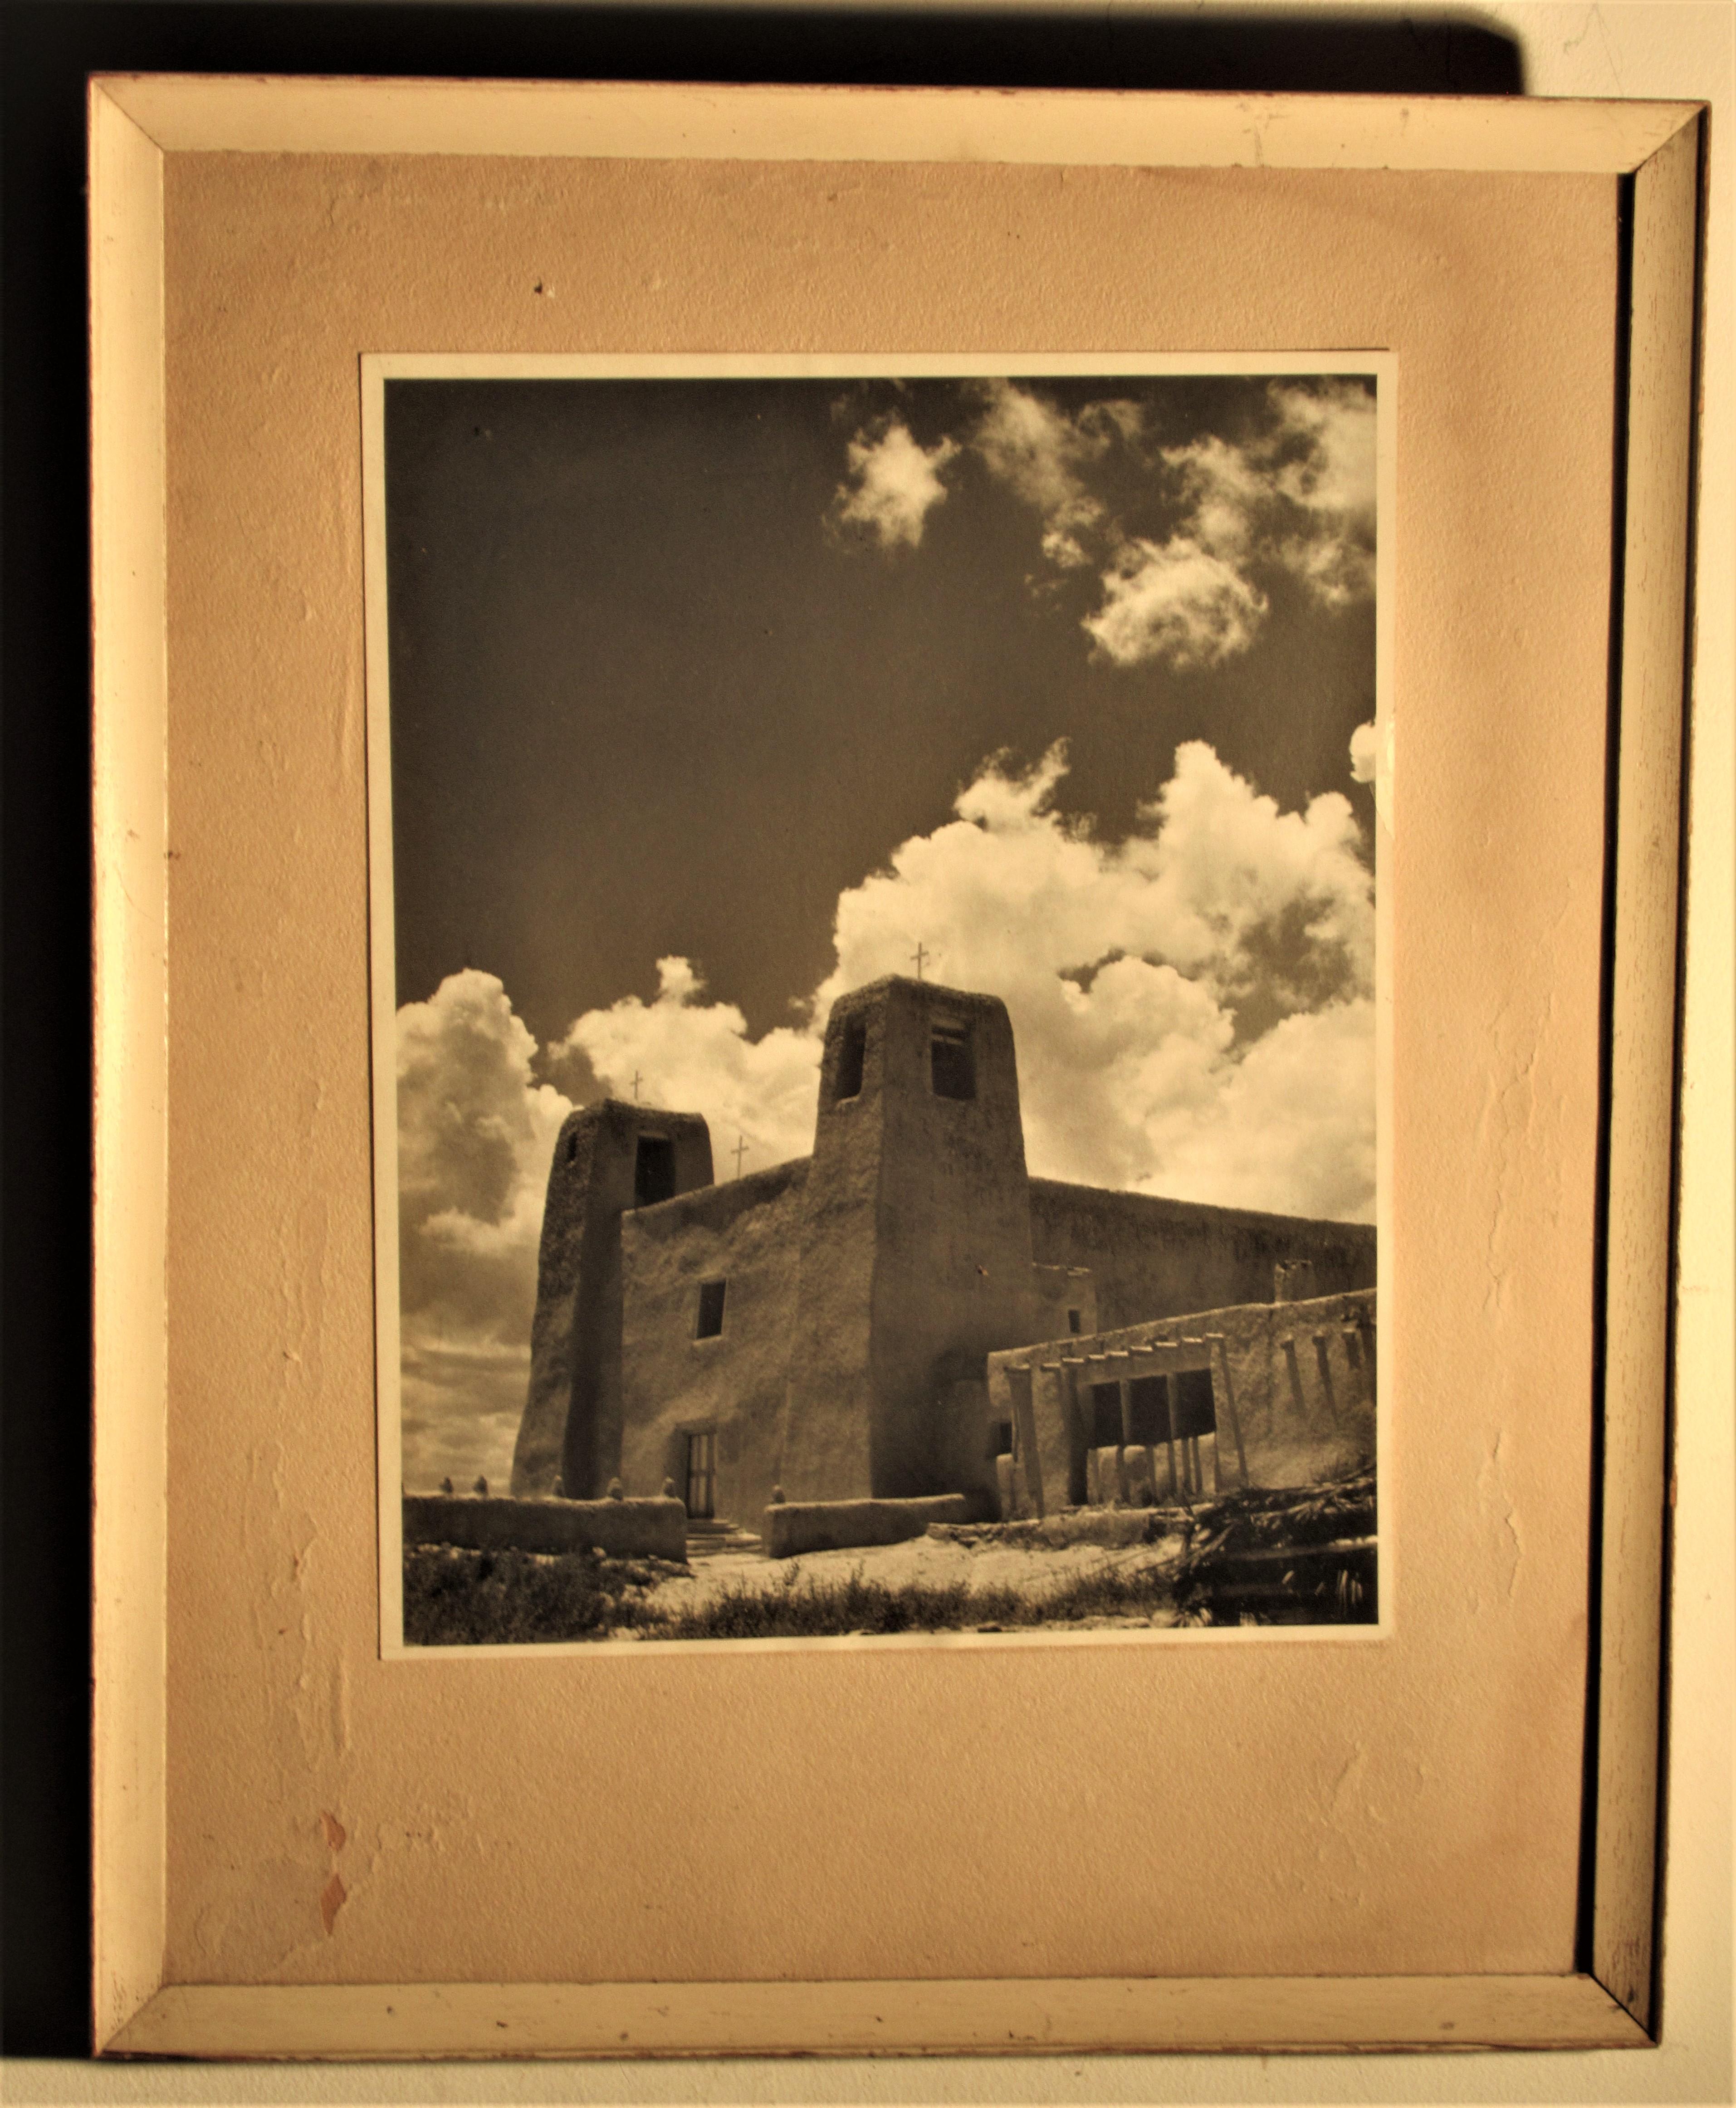 Old black and white photograph in the style of Ansel Adams, Taos Pueblo, New Mexico mission church in stark landscape with large cumulus clouds, circa 1940. Look at all pictures and read condition report in comment section.